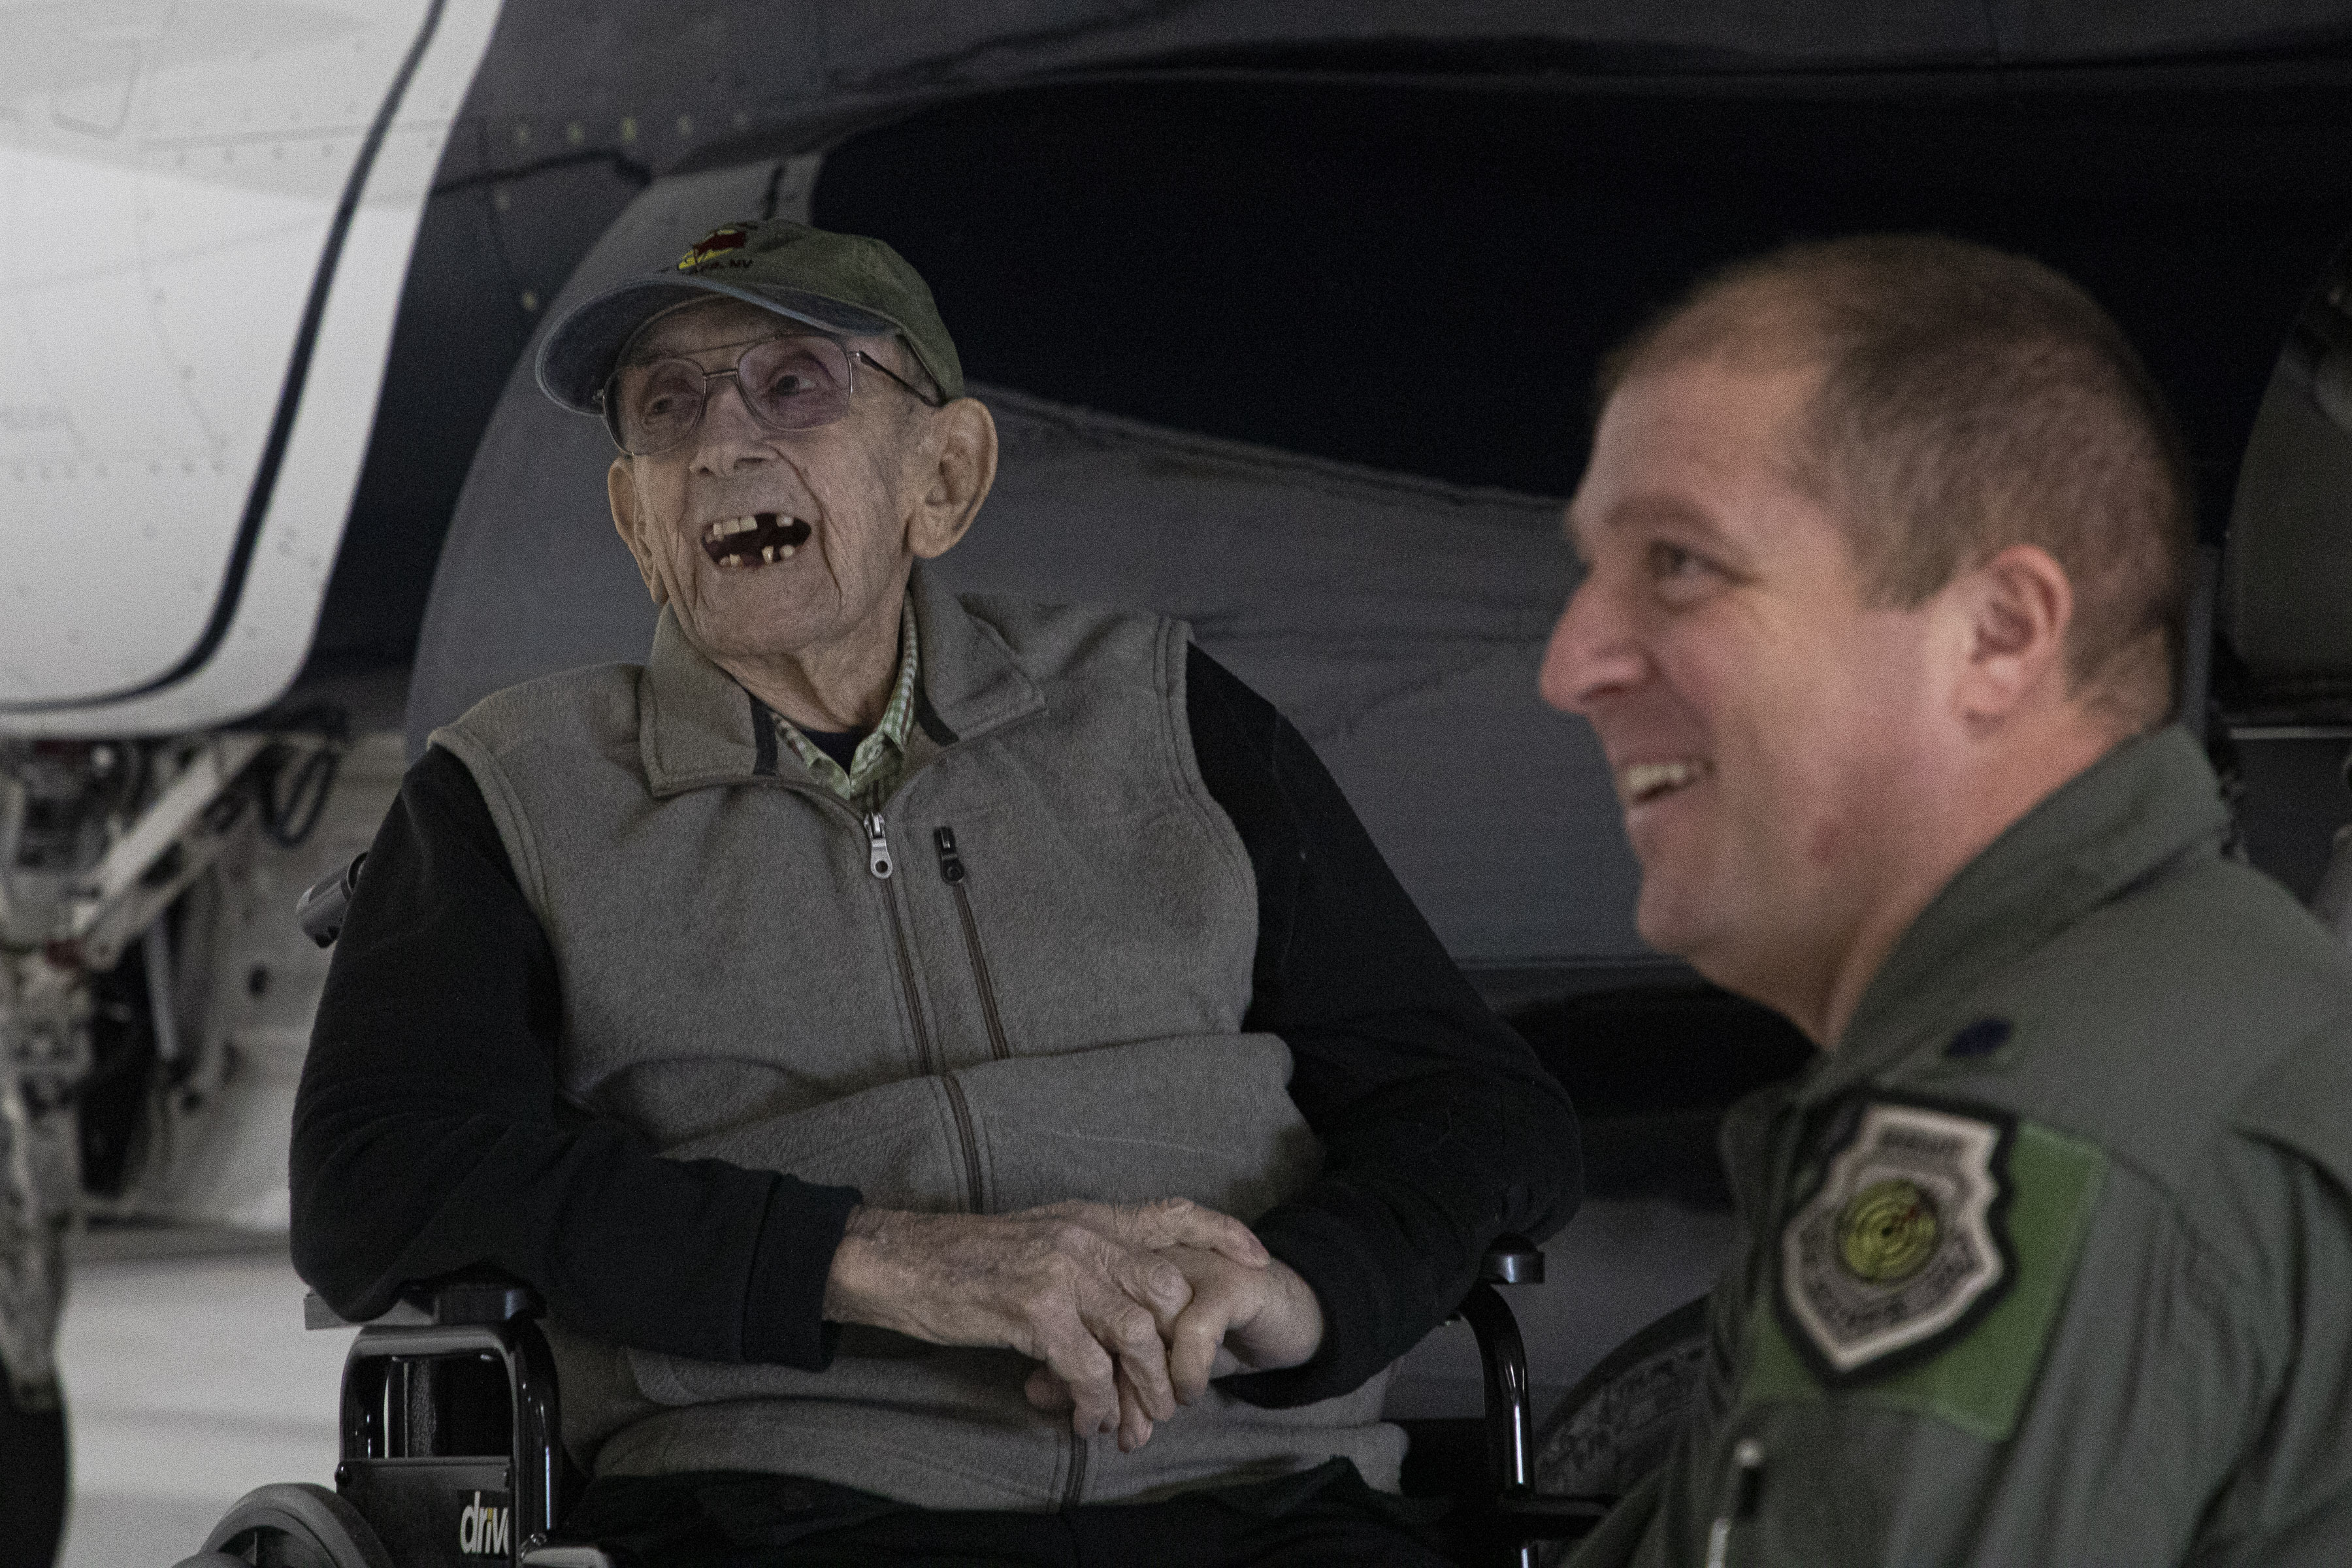 Image shows RAF Veteran with United States Air Force personnel.